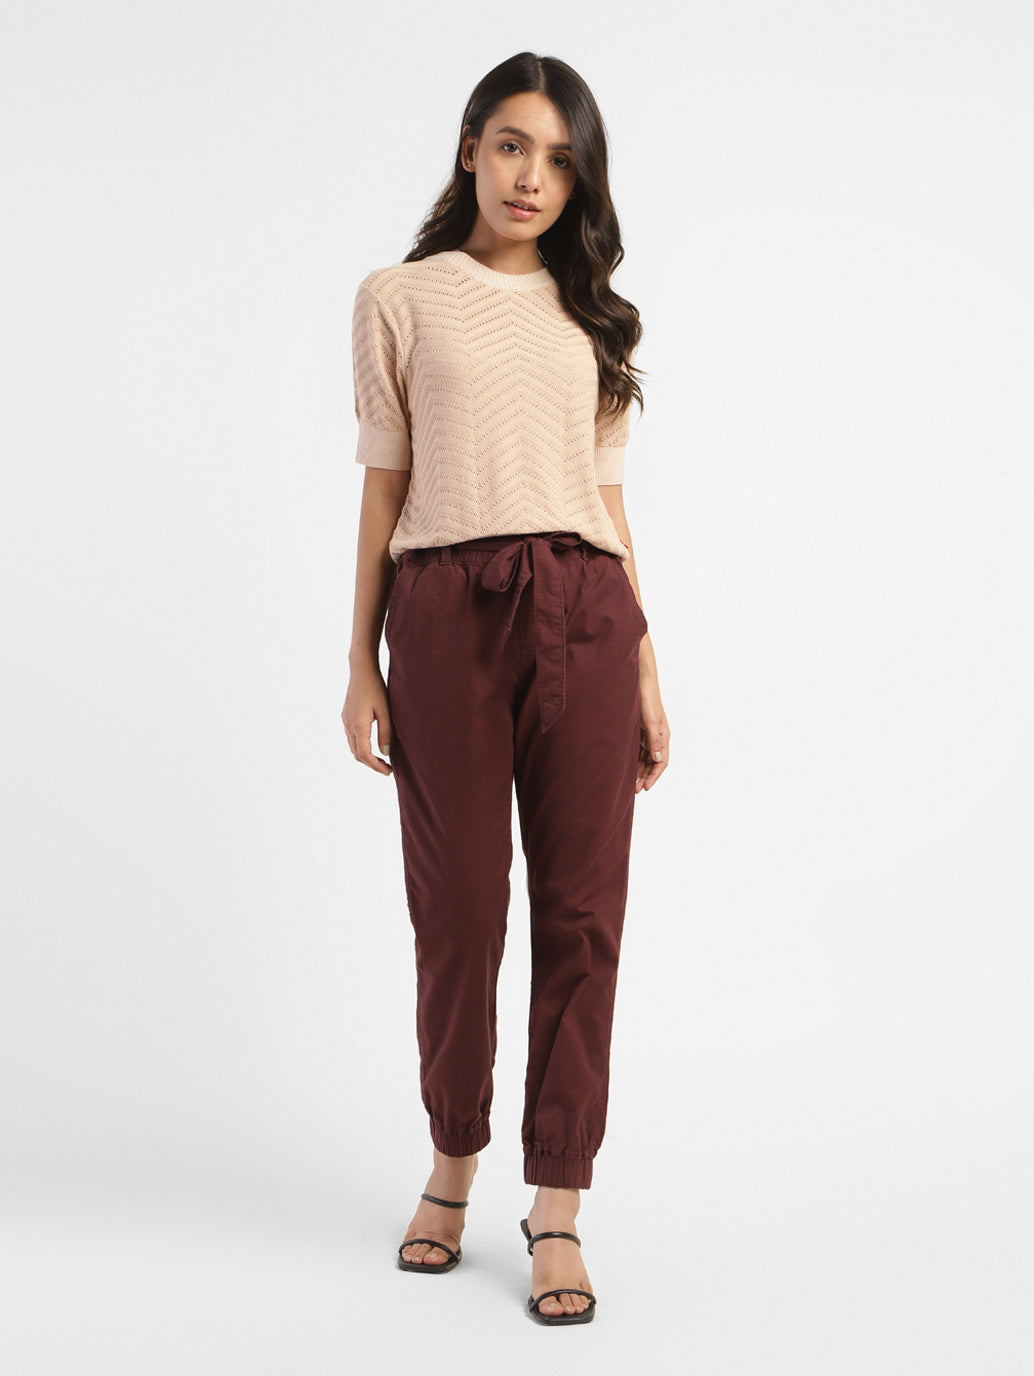 Women's Paperbag Trousers, Explore our New Arrivals